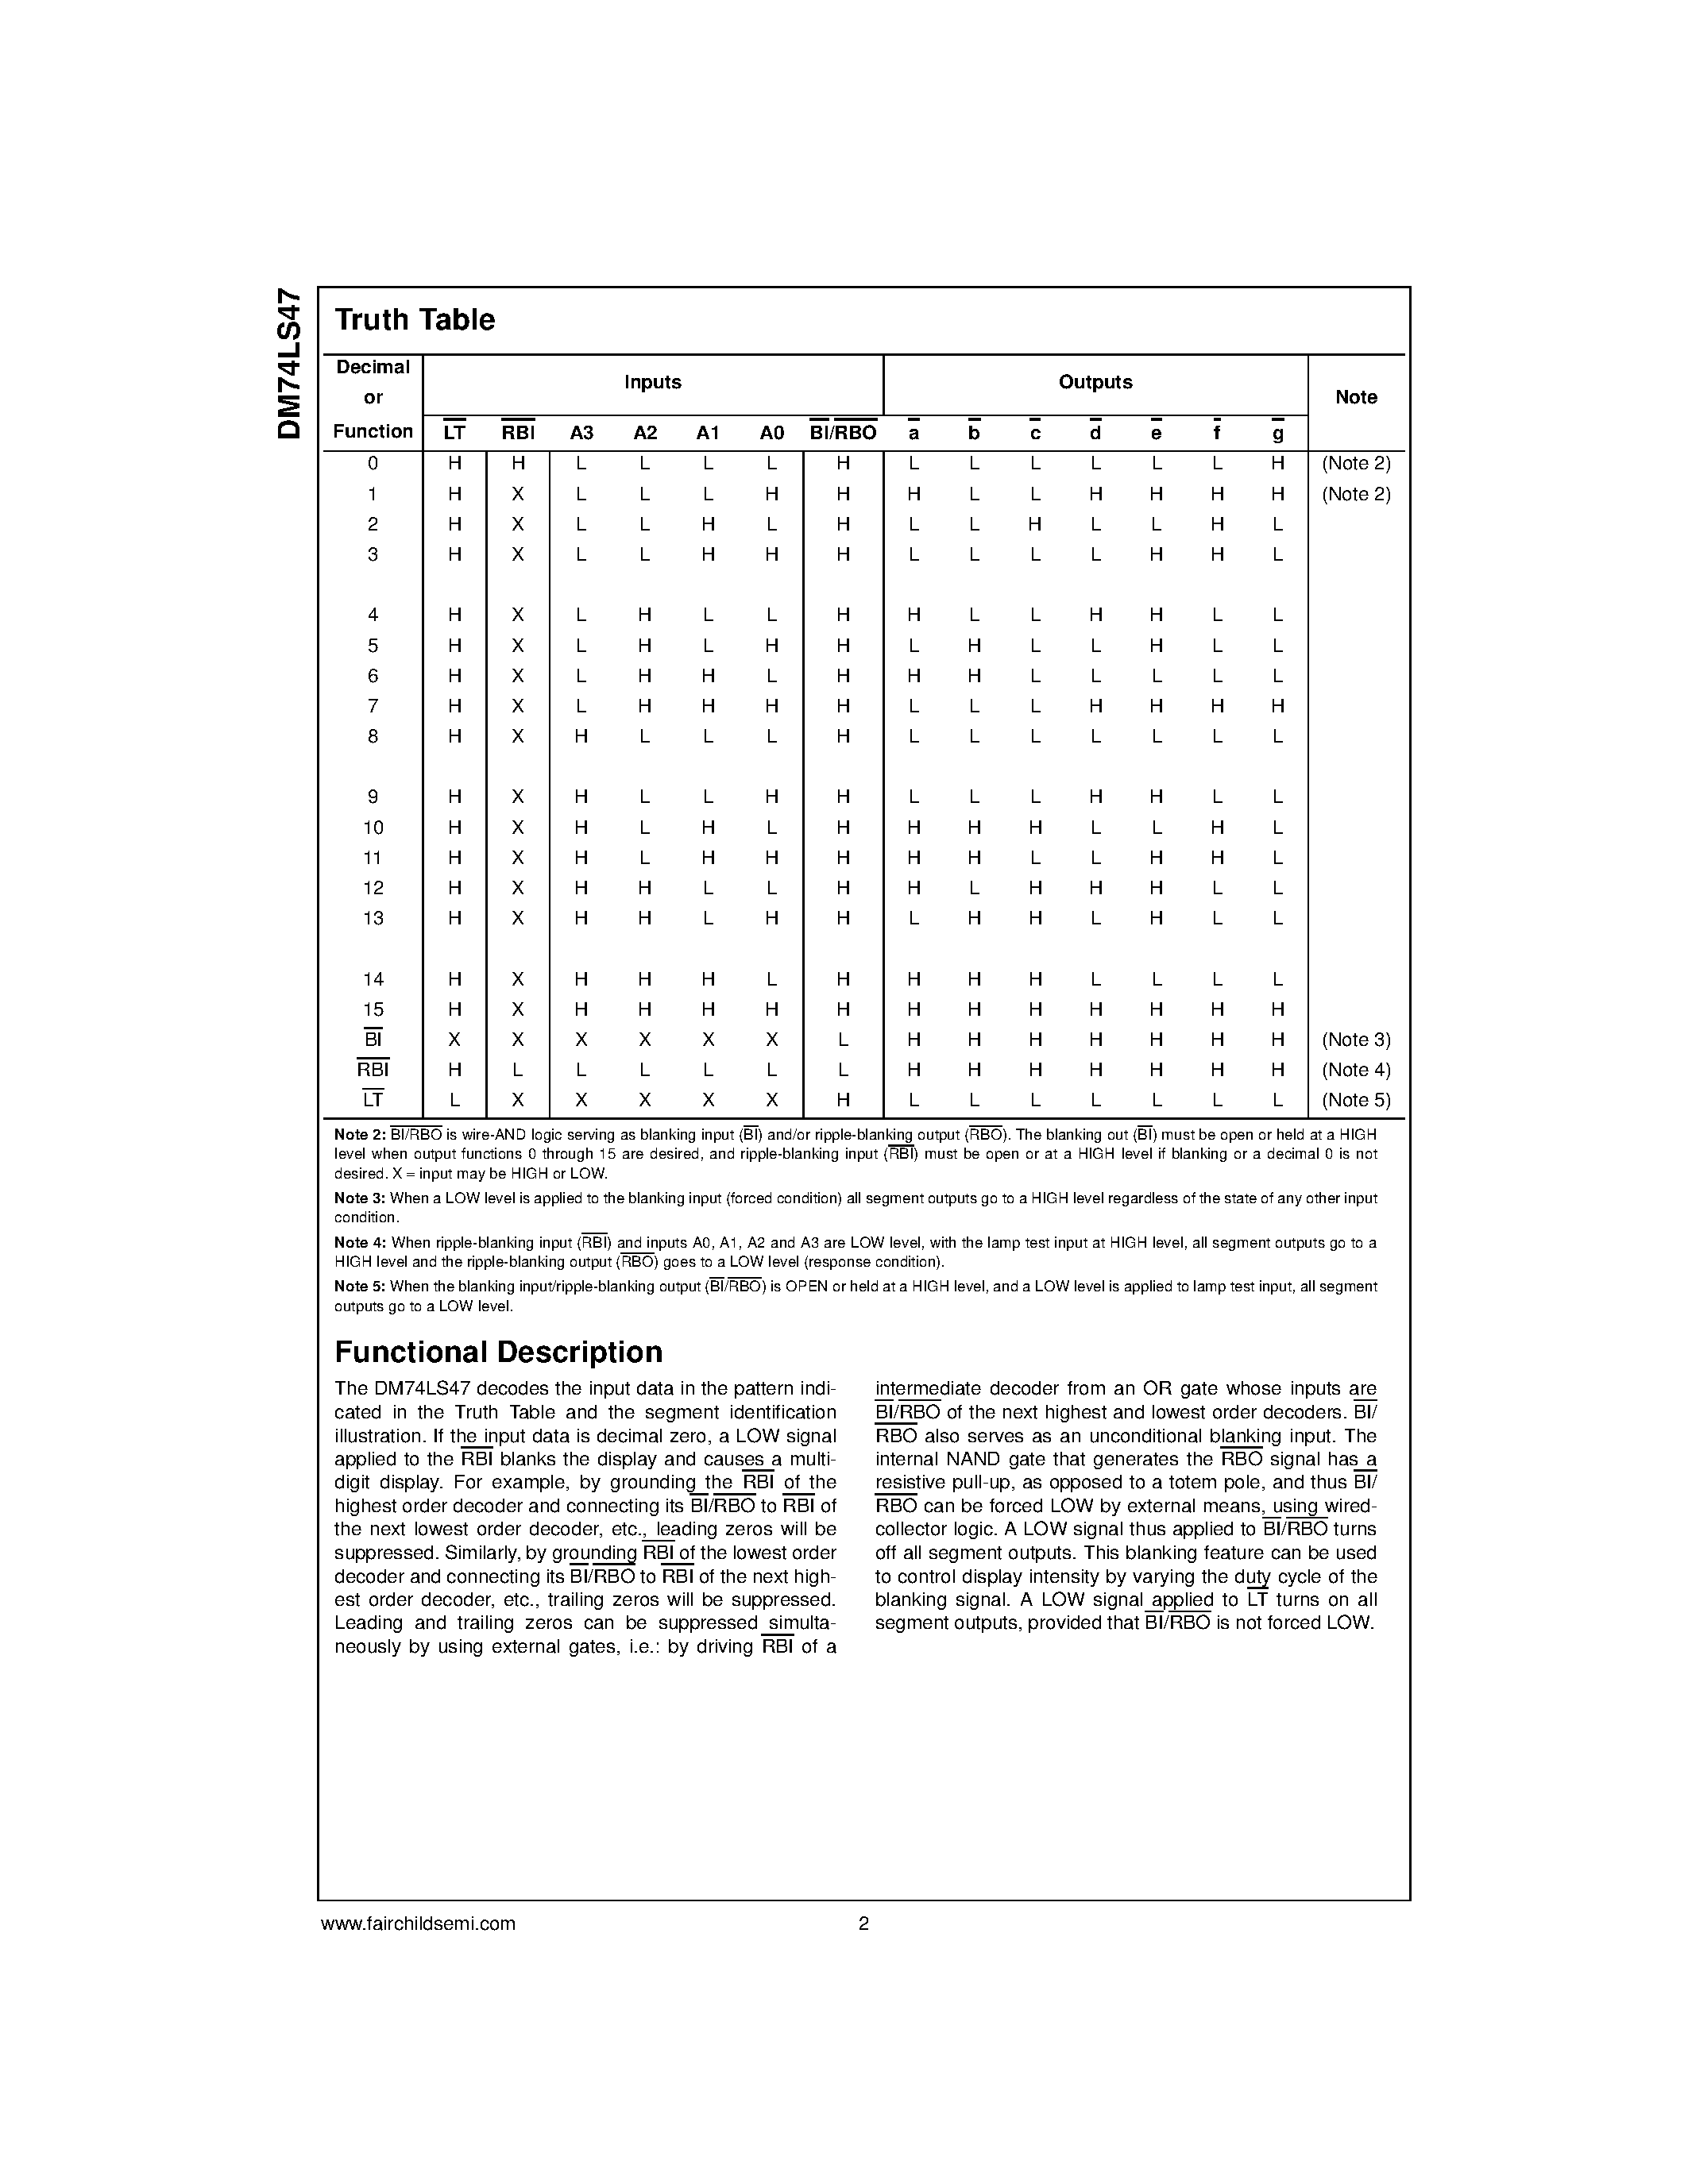 Datasheet DM74LS47 - BCD to 7-Segment Decoder/Driver with Open-Collector Outputs page 2